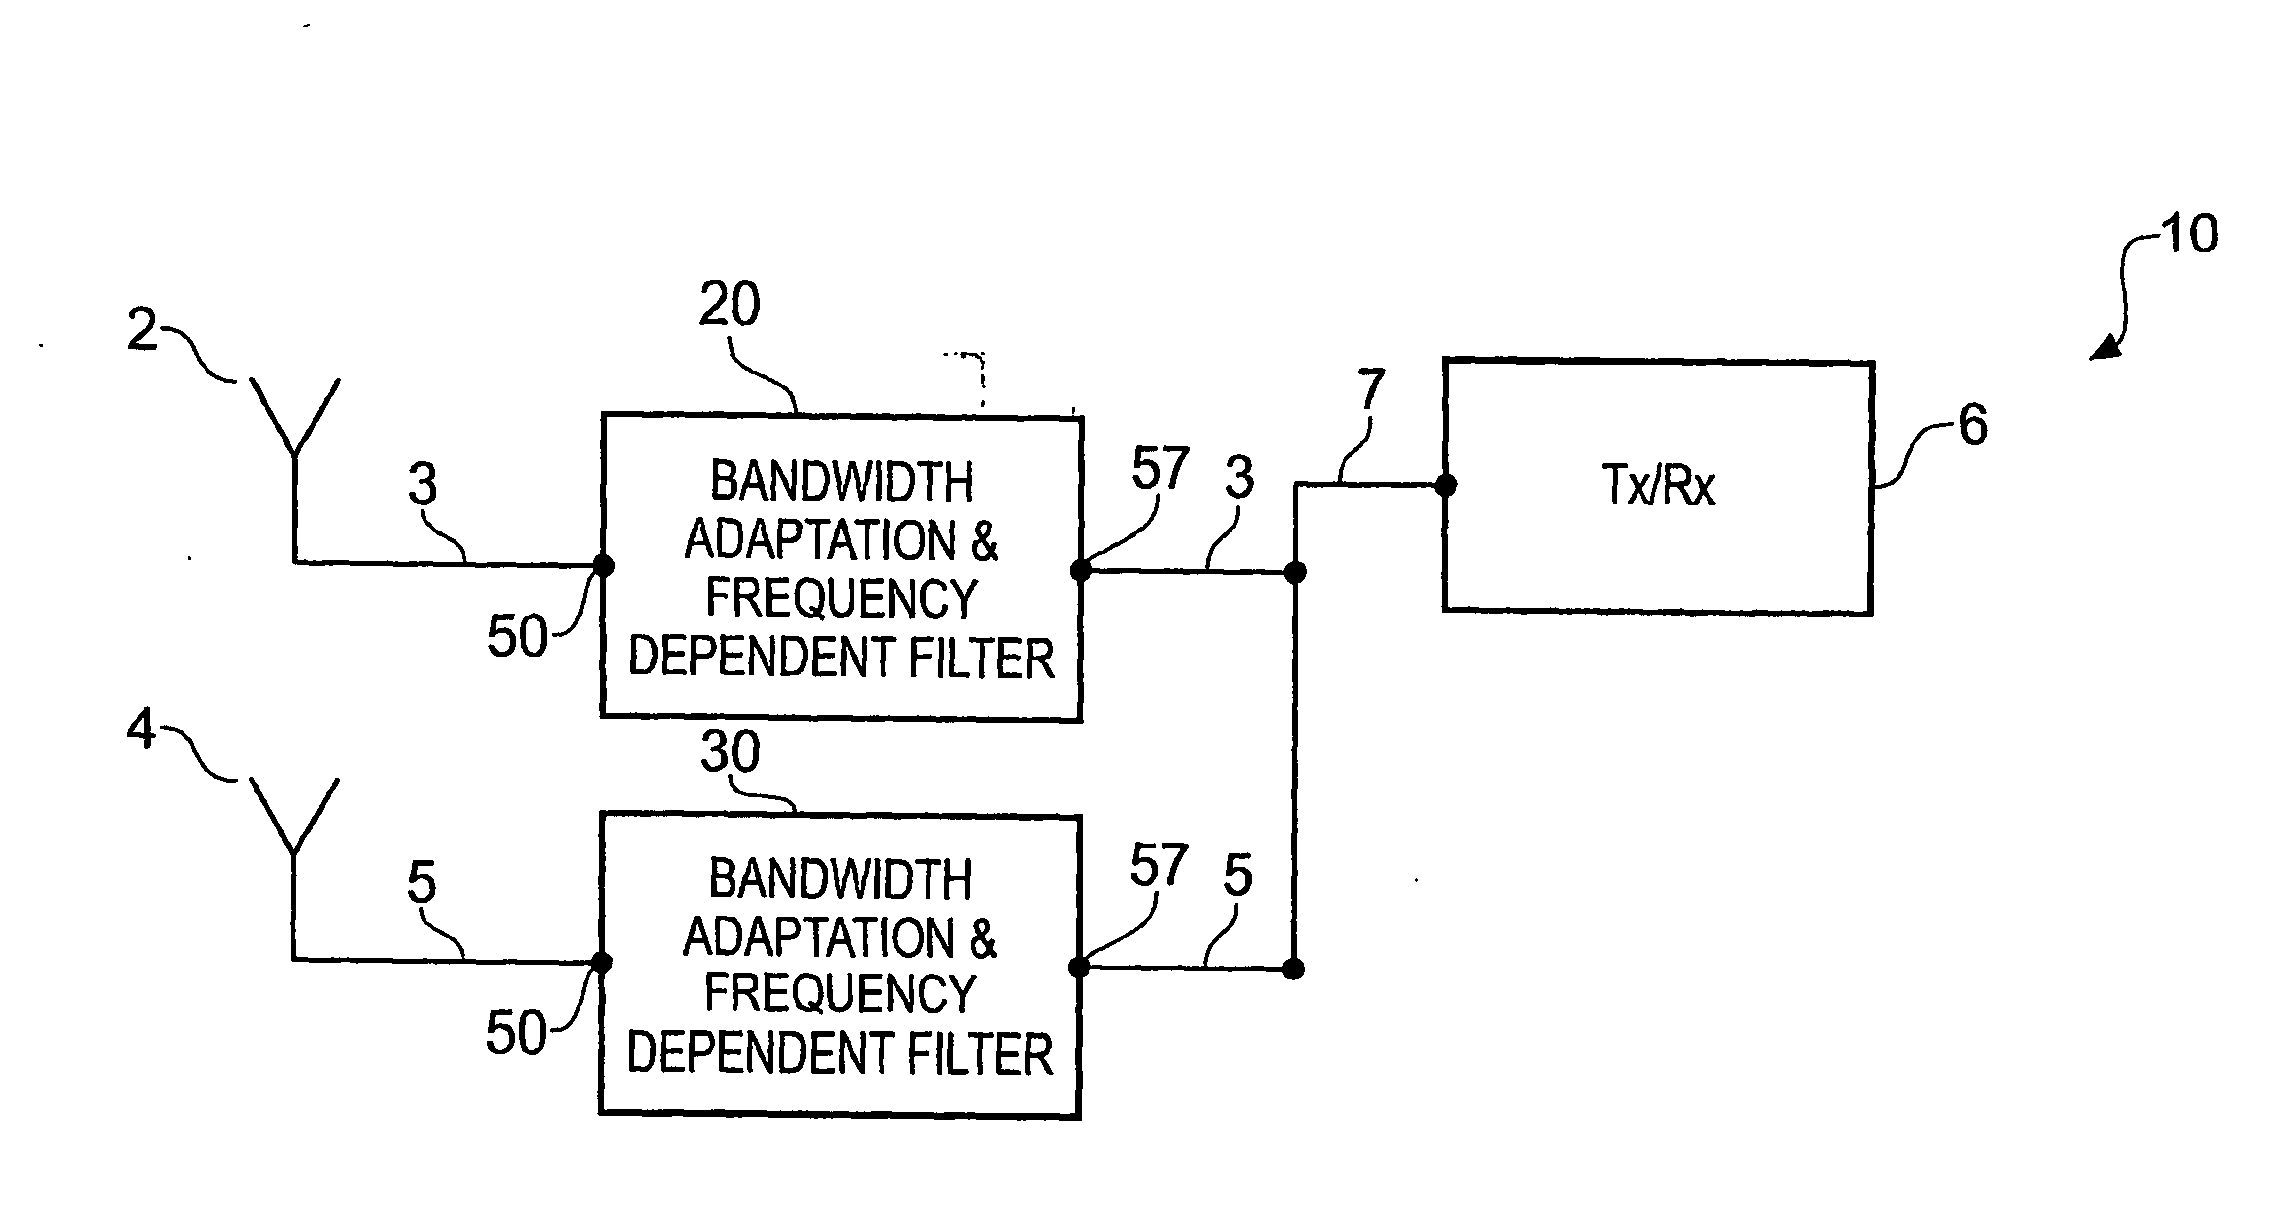 Apparatus for enabling two elements to share a common feed